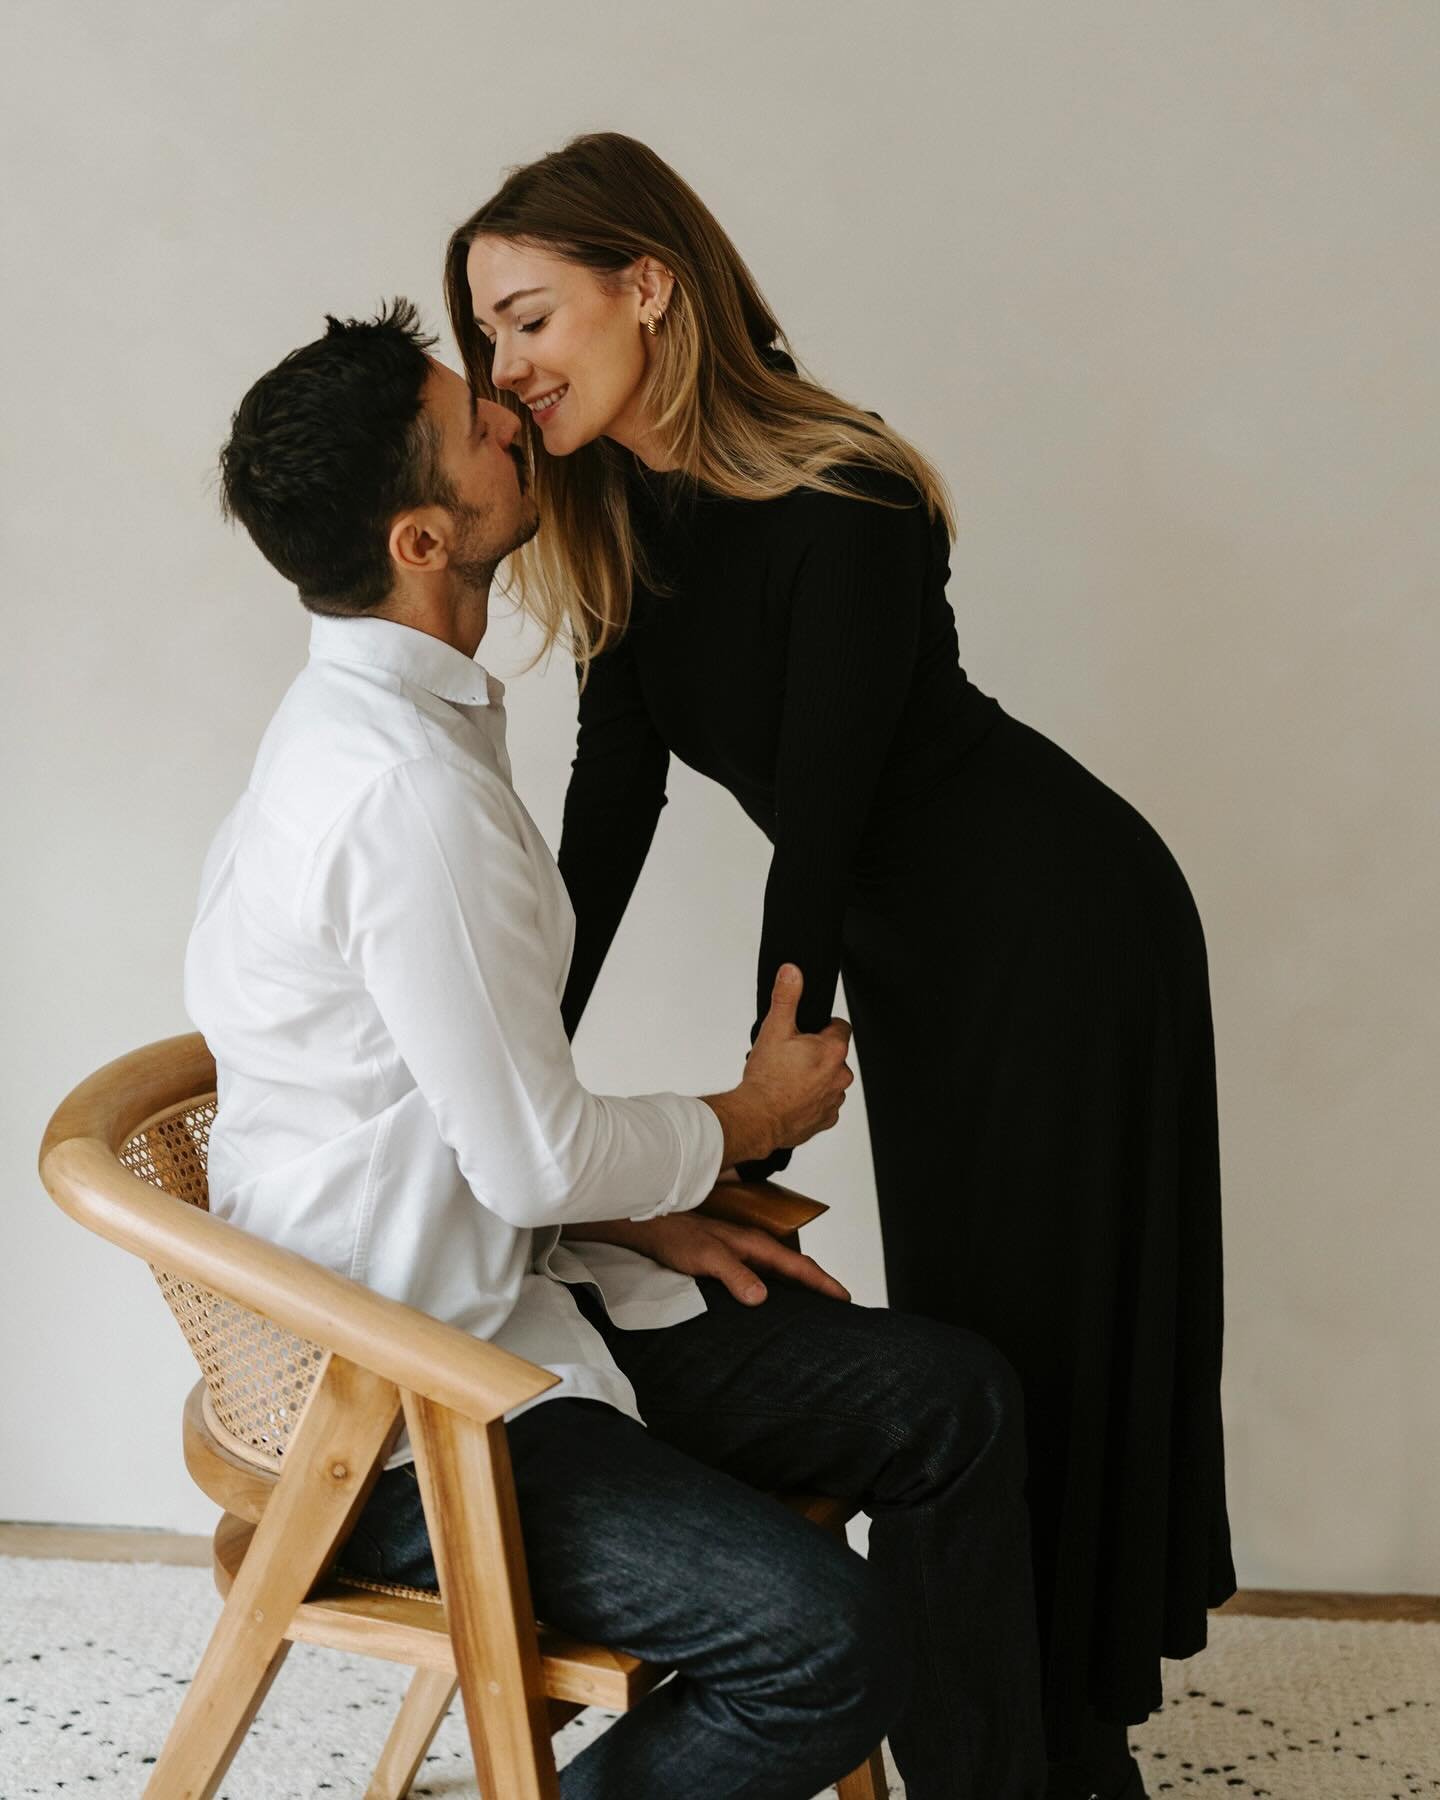 J + J get married soon and I can&rsquo;t even imagine how fabulous it&rsquo;ll be if this is how cool they look simply hanging out in a tiny studio. (I mean, I can kind of imagine it, I know there will be an espresso martini bar after all)